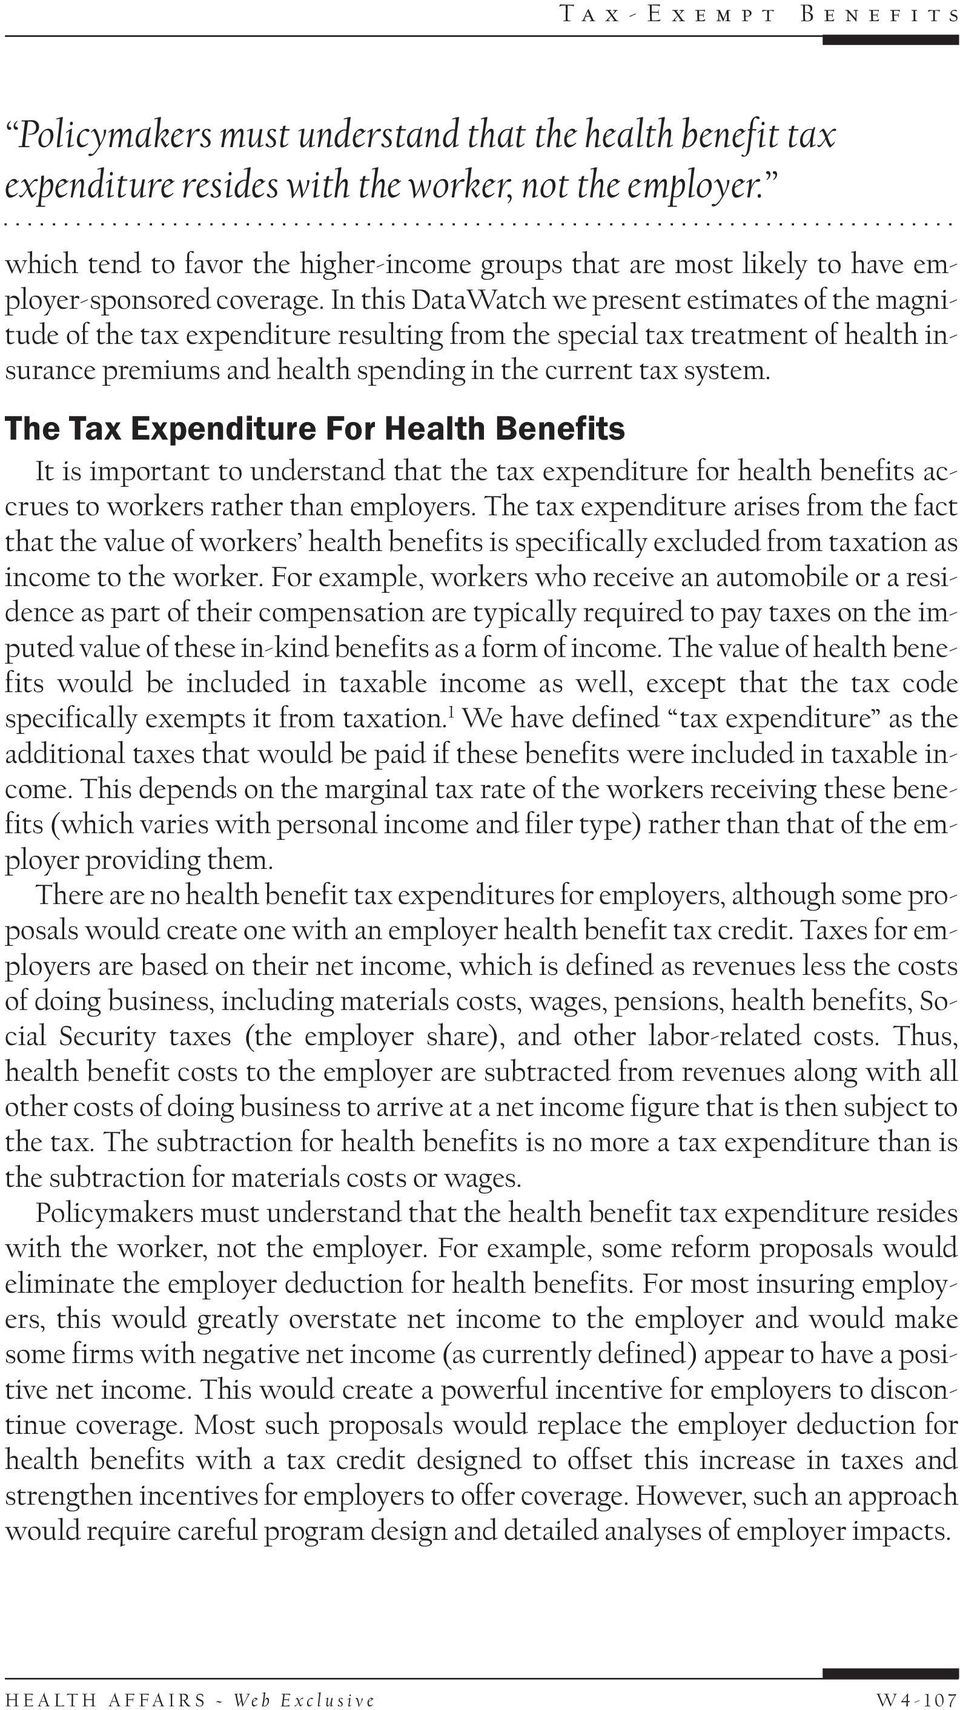 In this DataWatch we present estimates of the magnitude of the tax expenditure resulting from the special tax treatment of health insurance premiums and health spending in the current tax system.